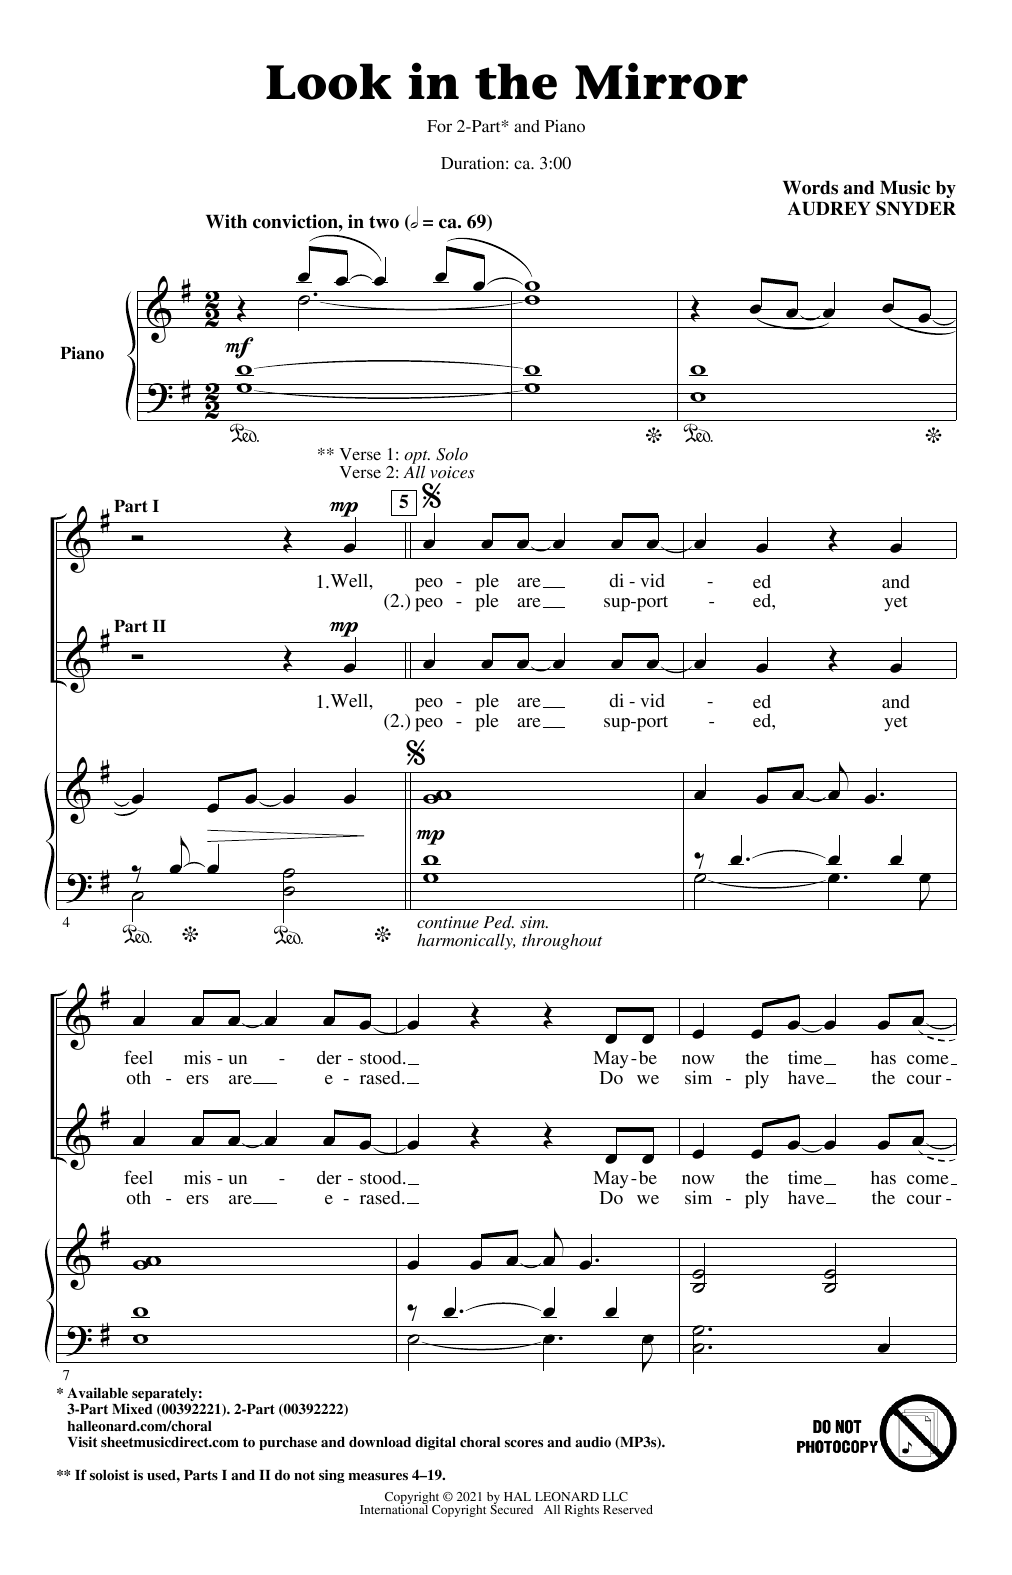 Download Audrey Snyder Look In The Mirror Sheet Music